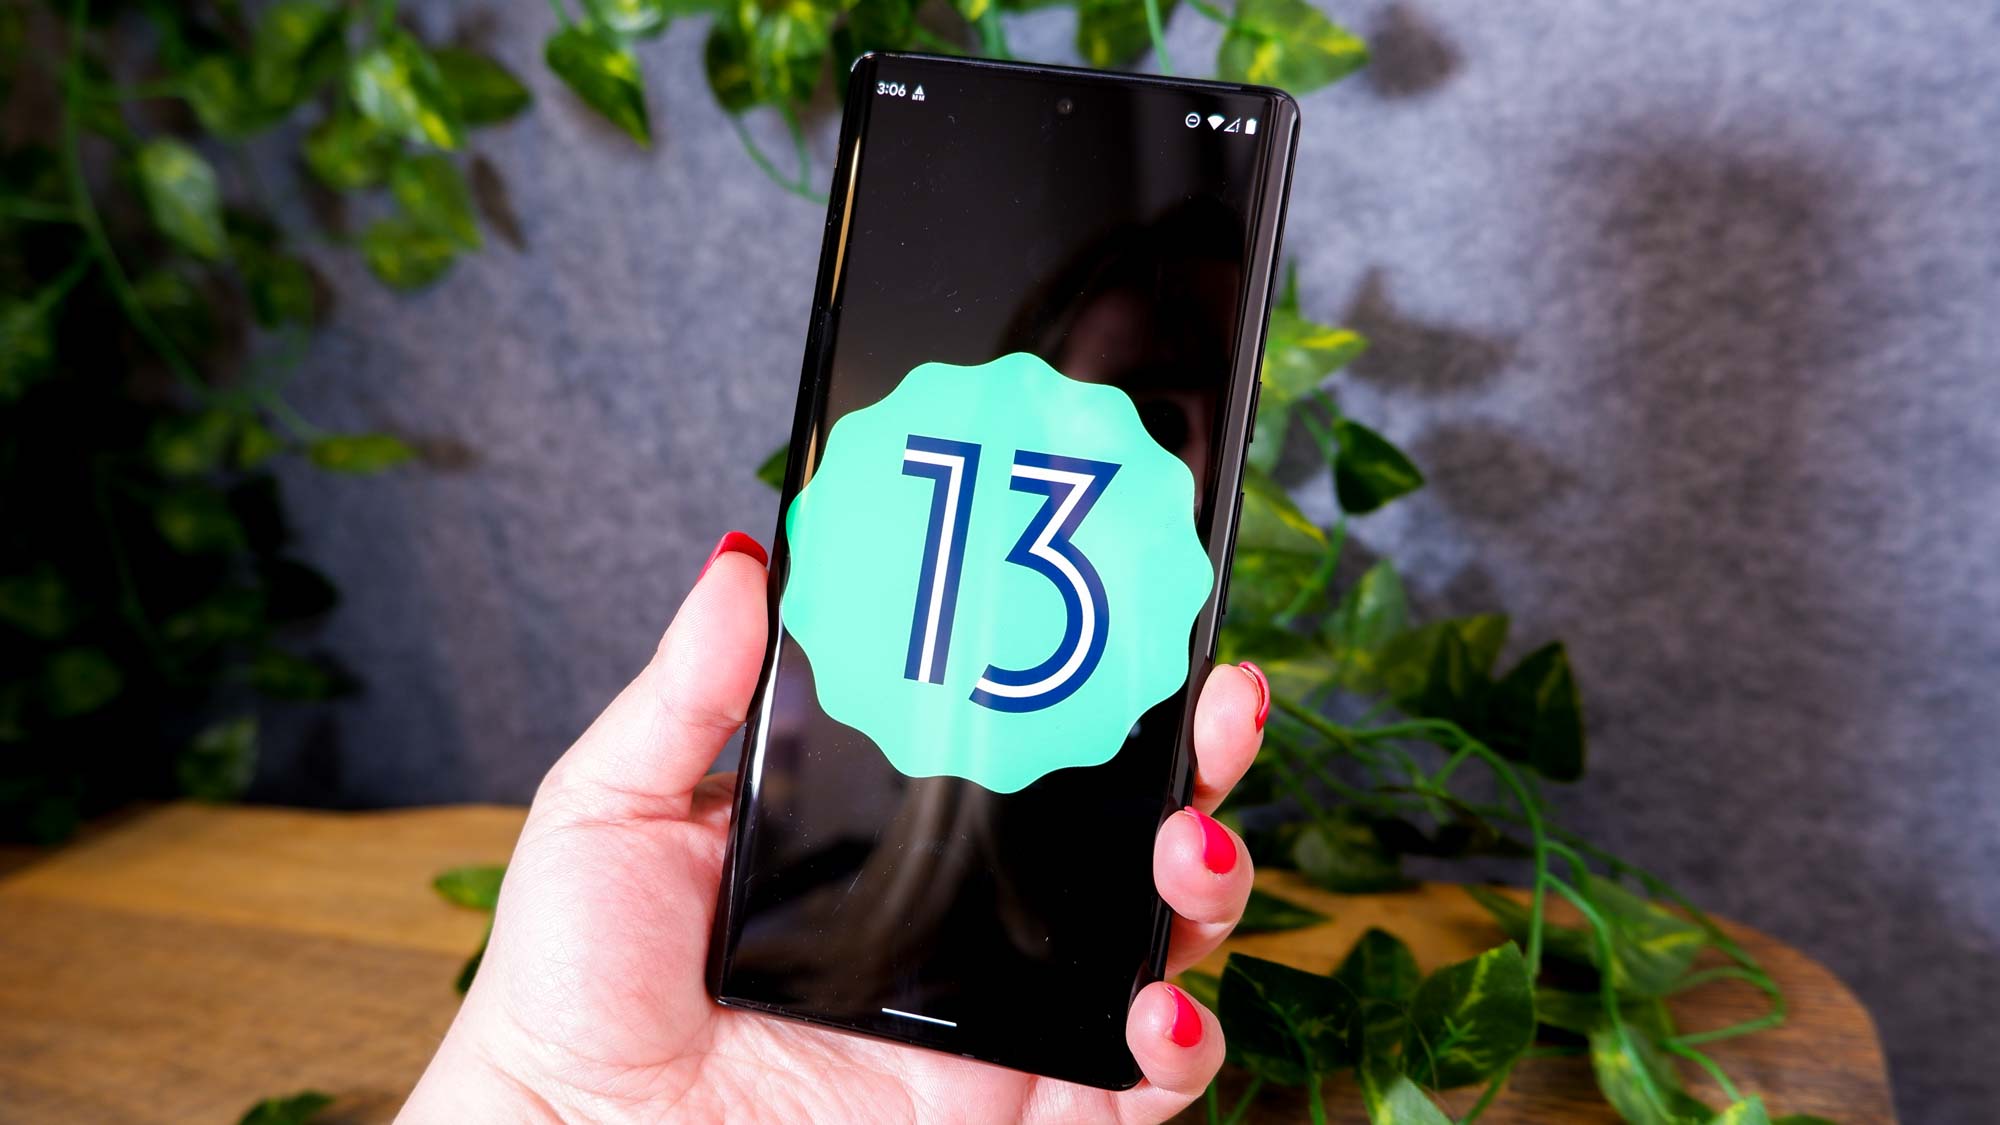 Logótipo do Android 13 num smartphone